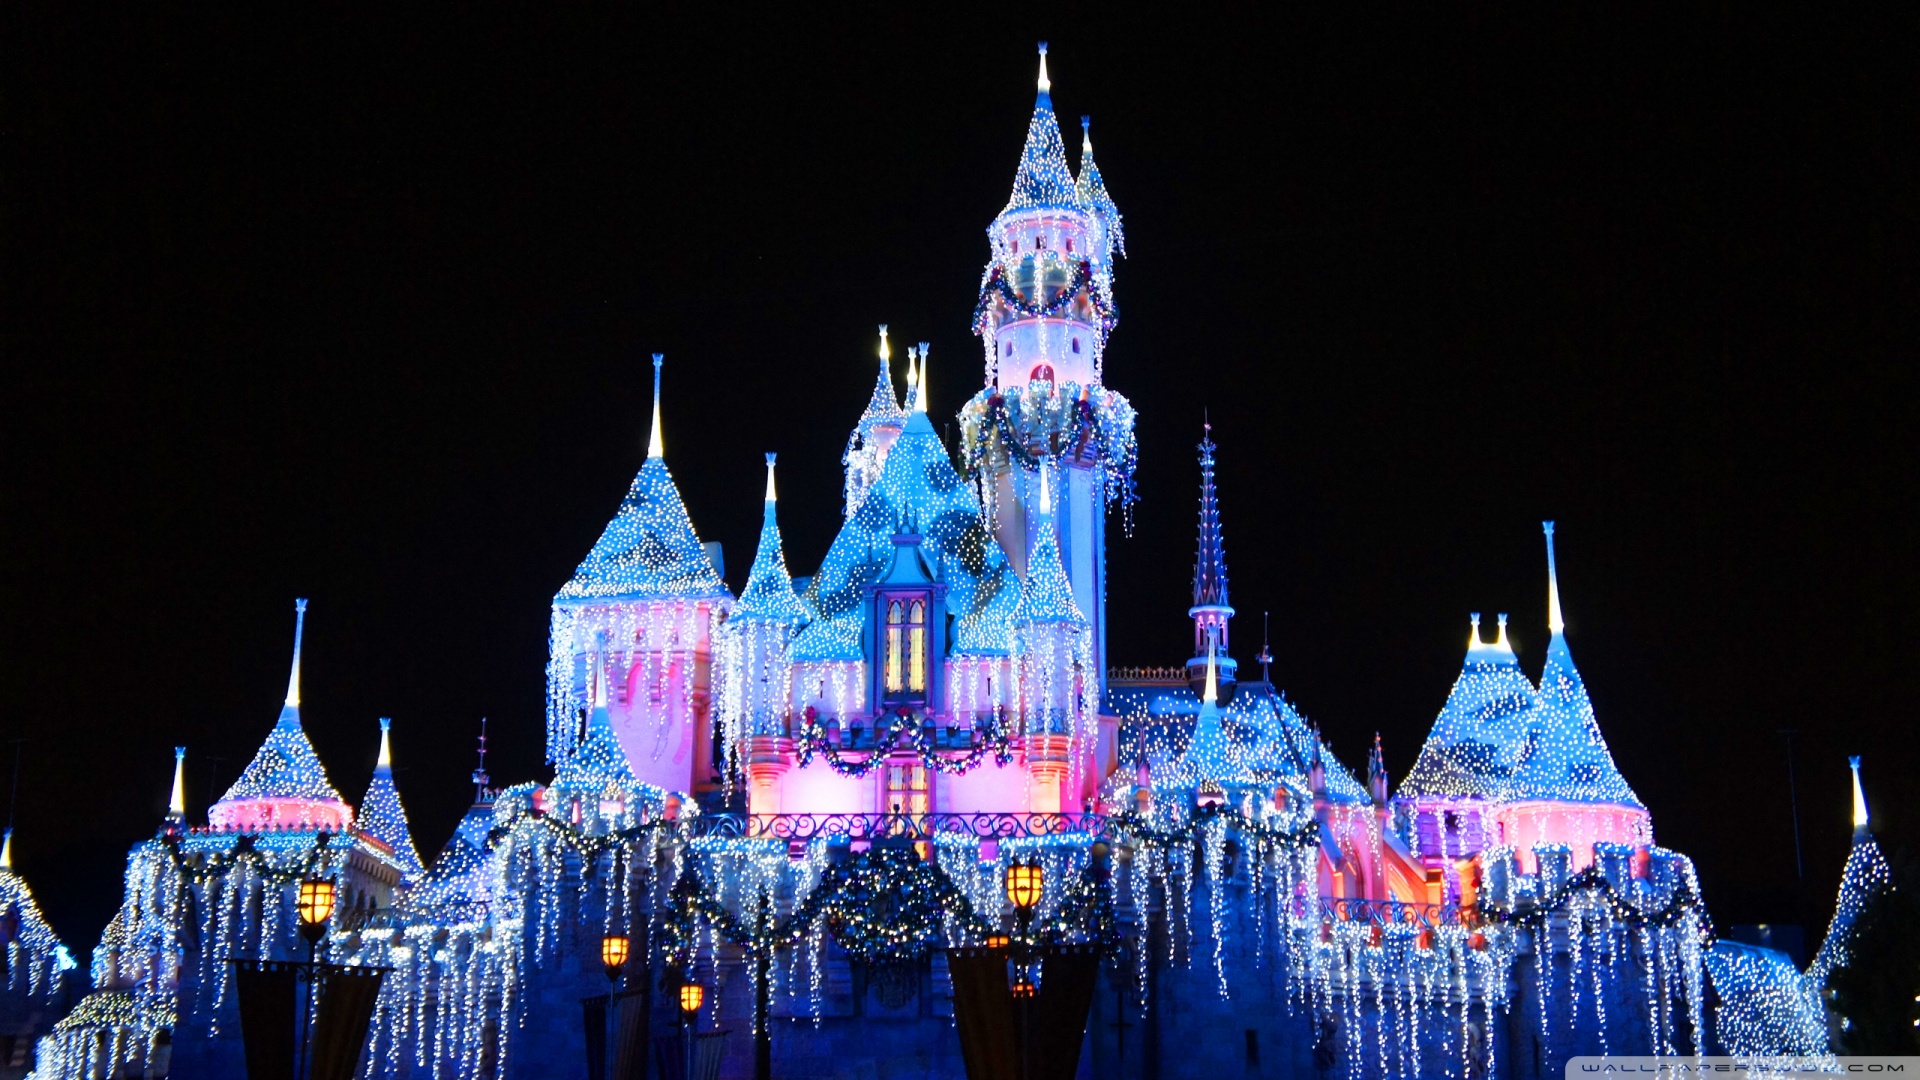 Download Disney Castle Wallpaper Free pictures in high definition or